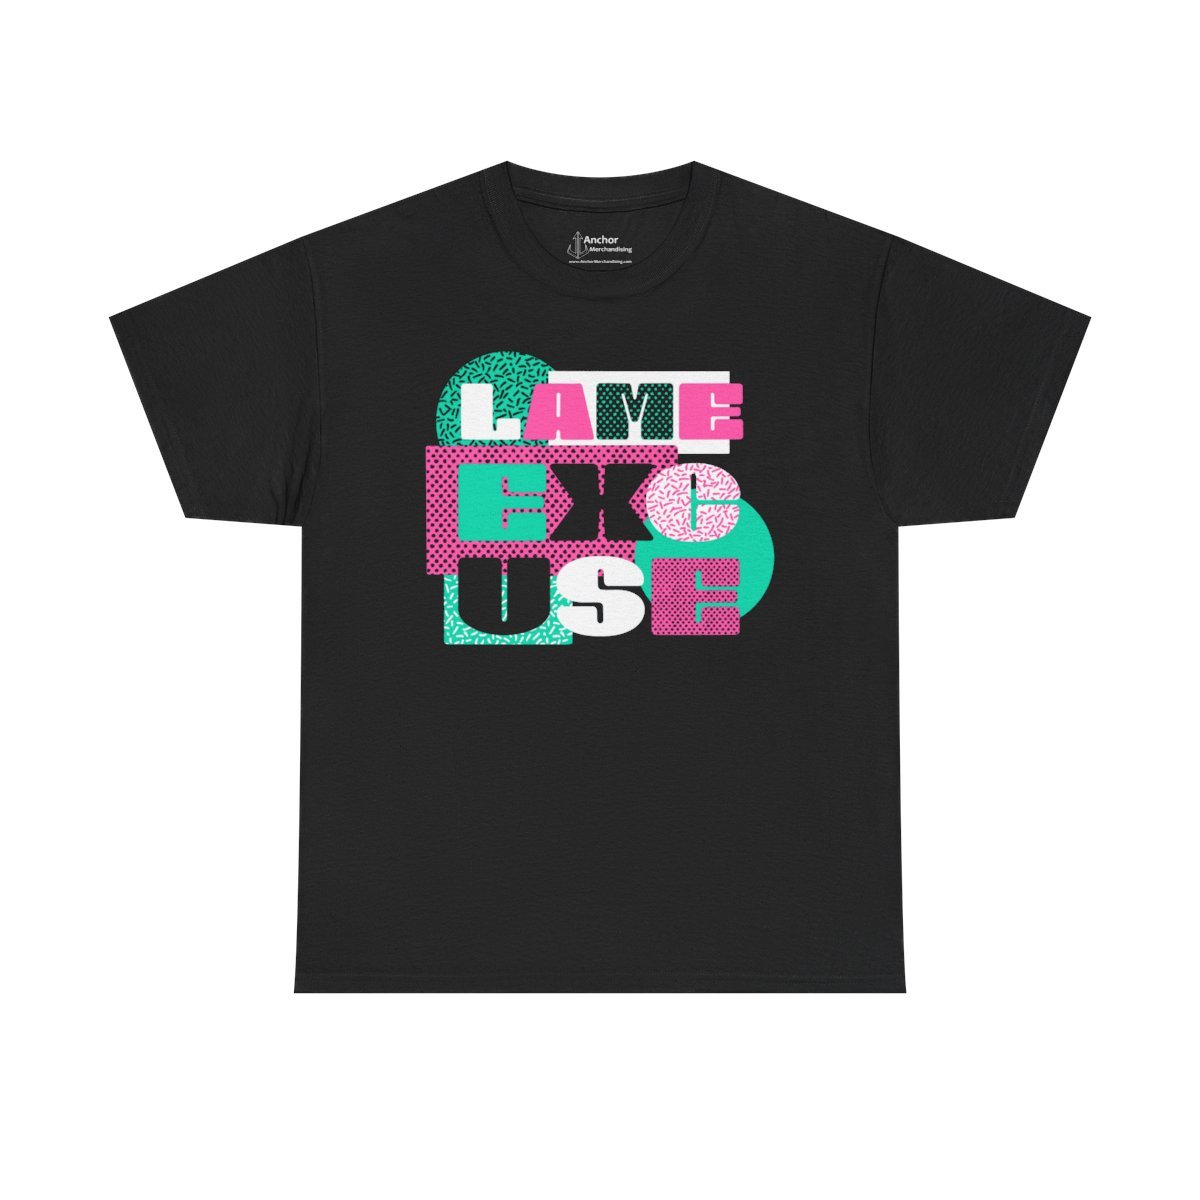 Lame Excuse PG Short Sleeve T-Shirt